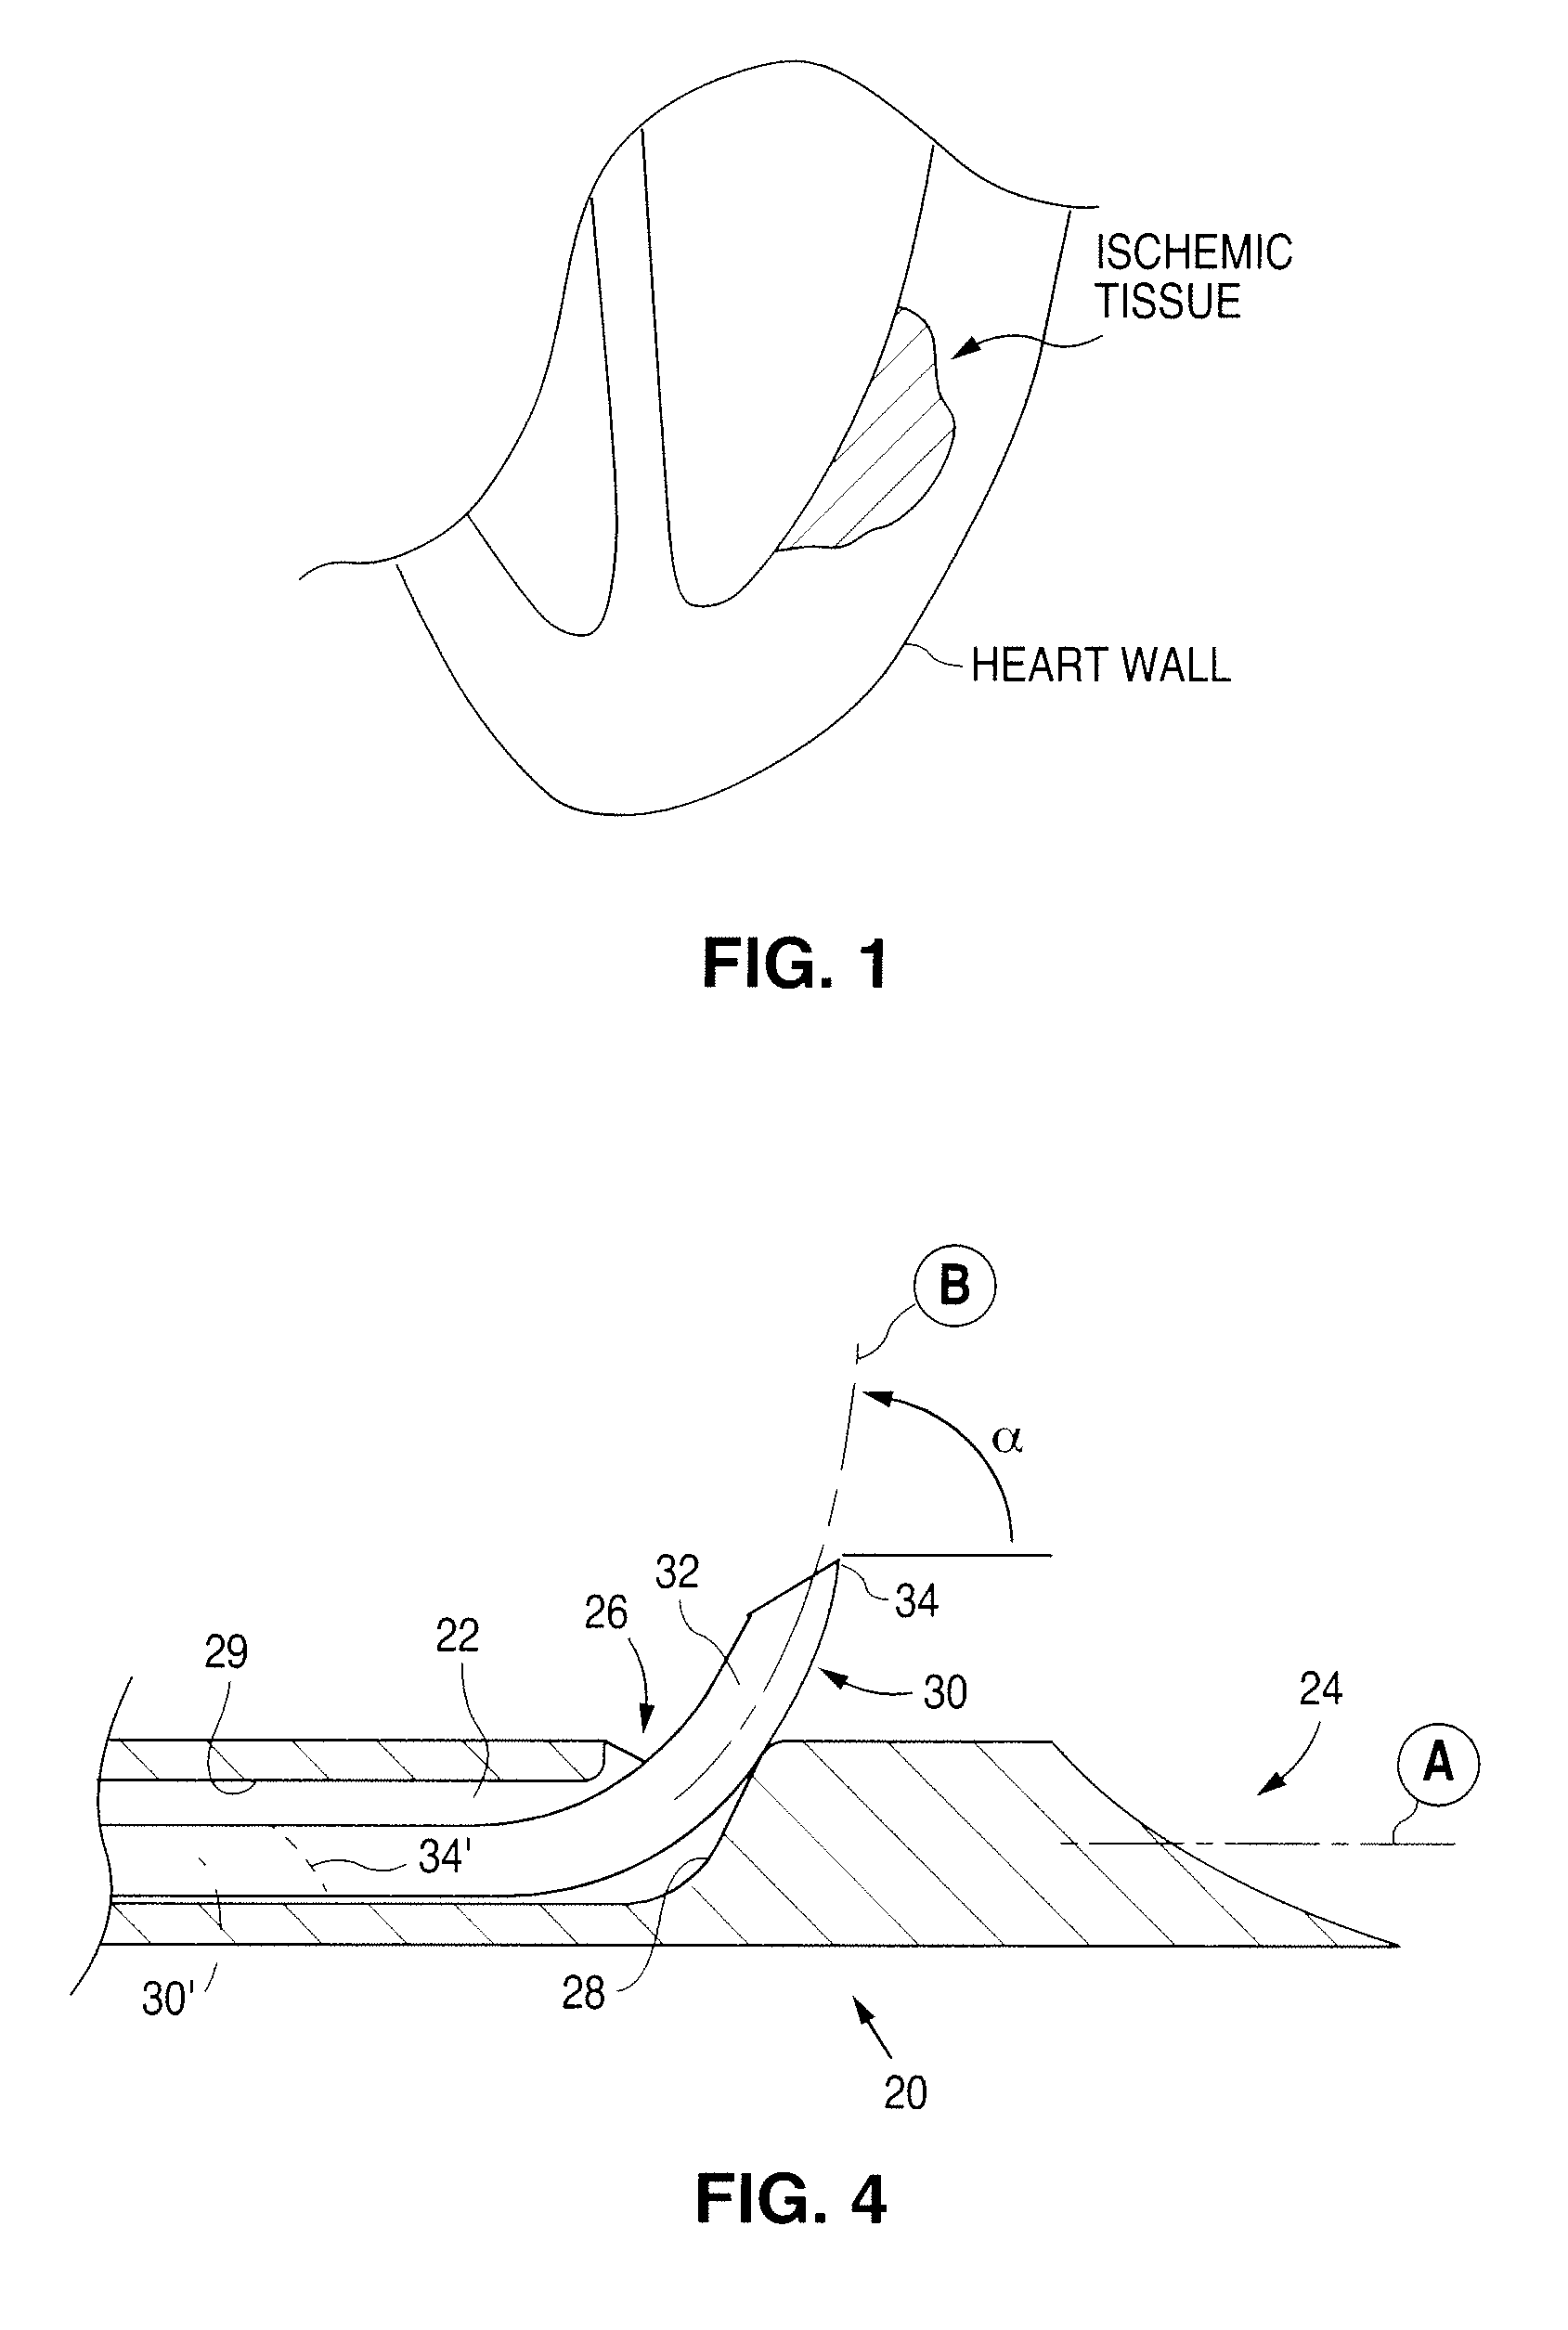 Agent delivery catheter including an anchor and injection needle